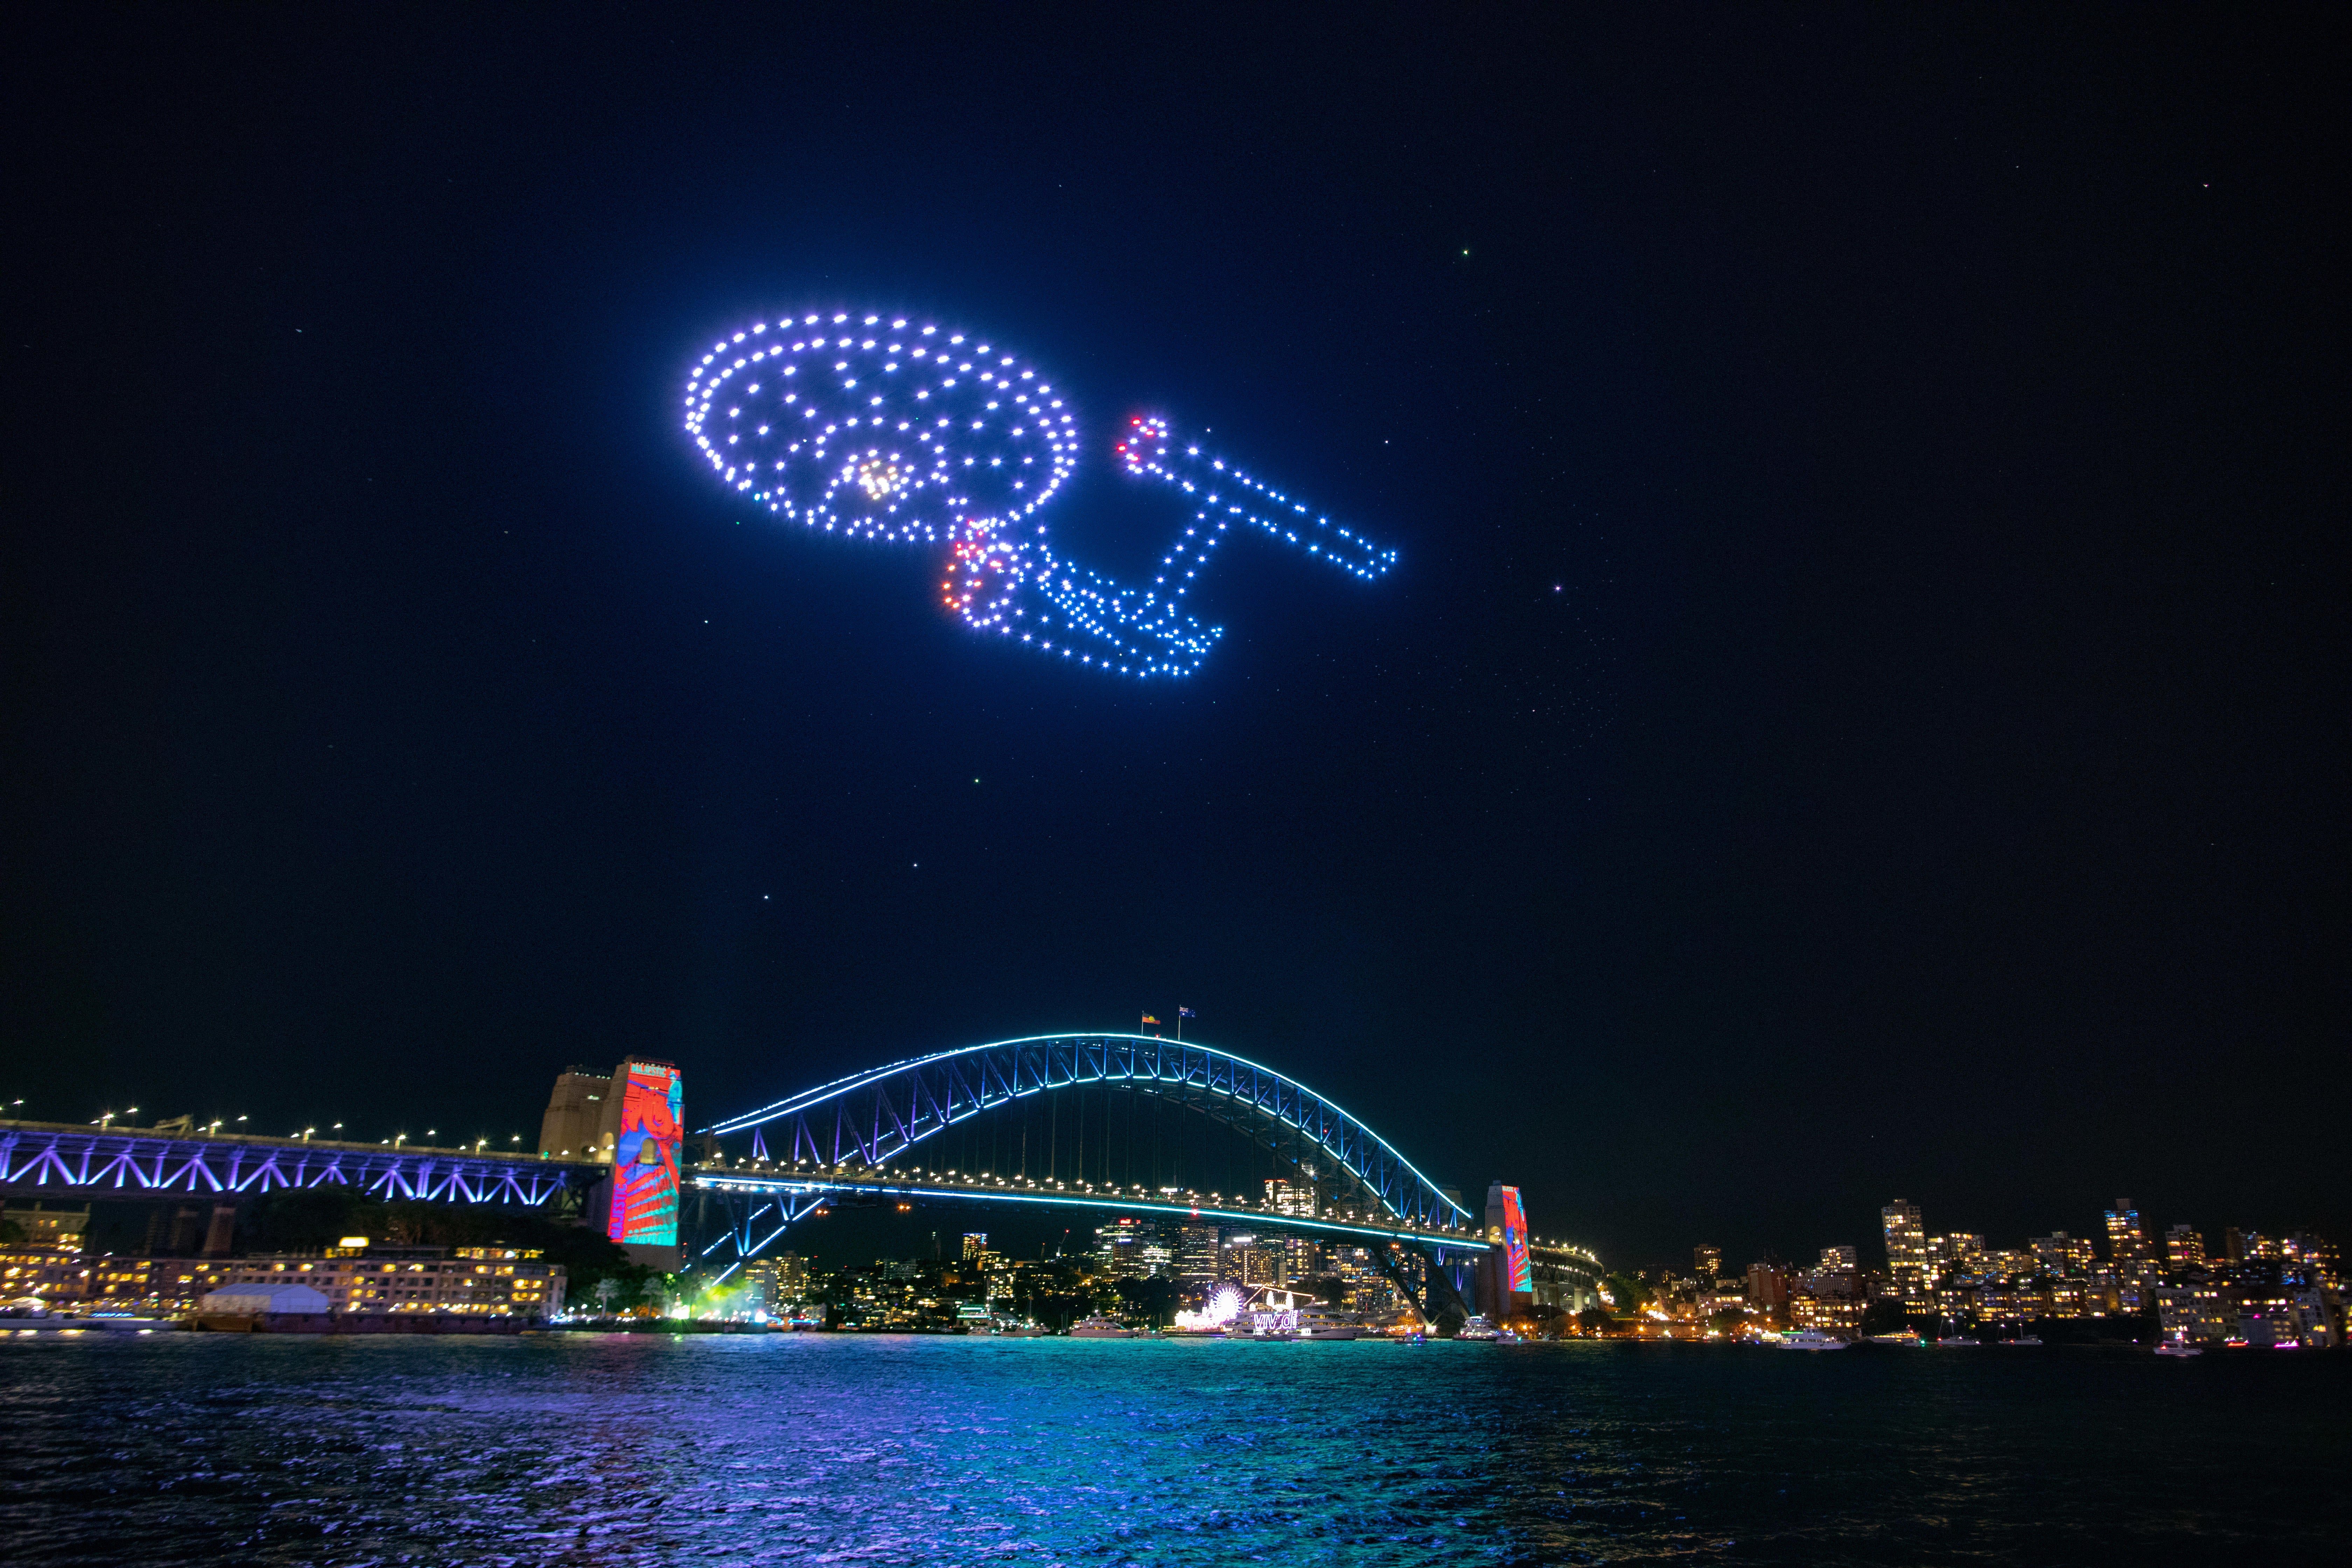 Star Trek Gets Epic Drone Light Show You Need to See